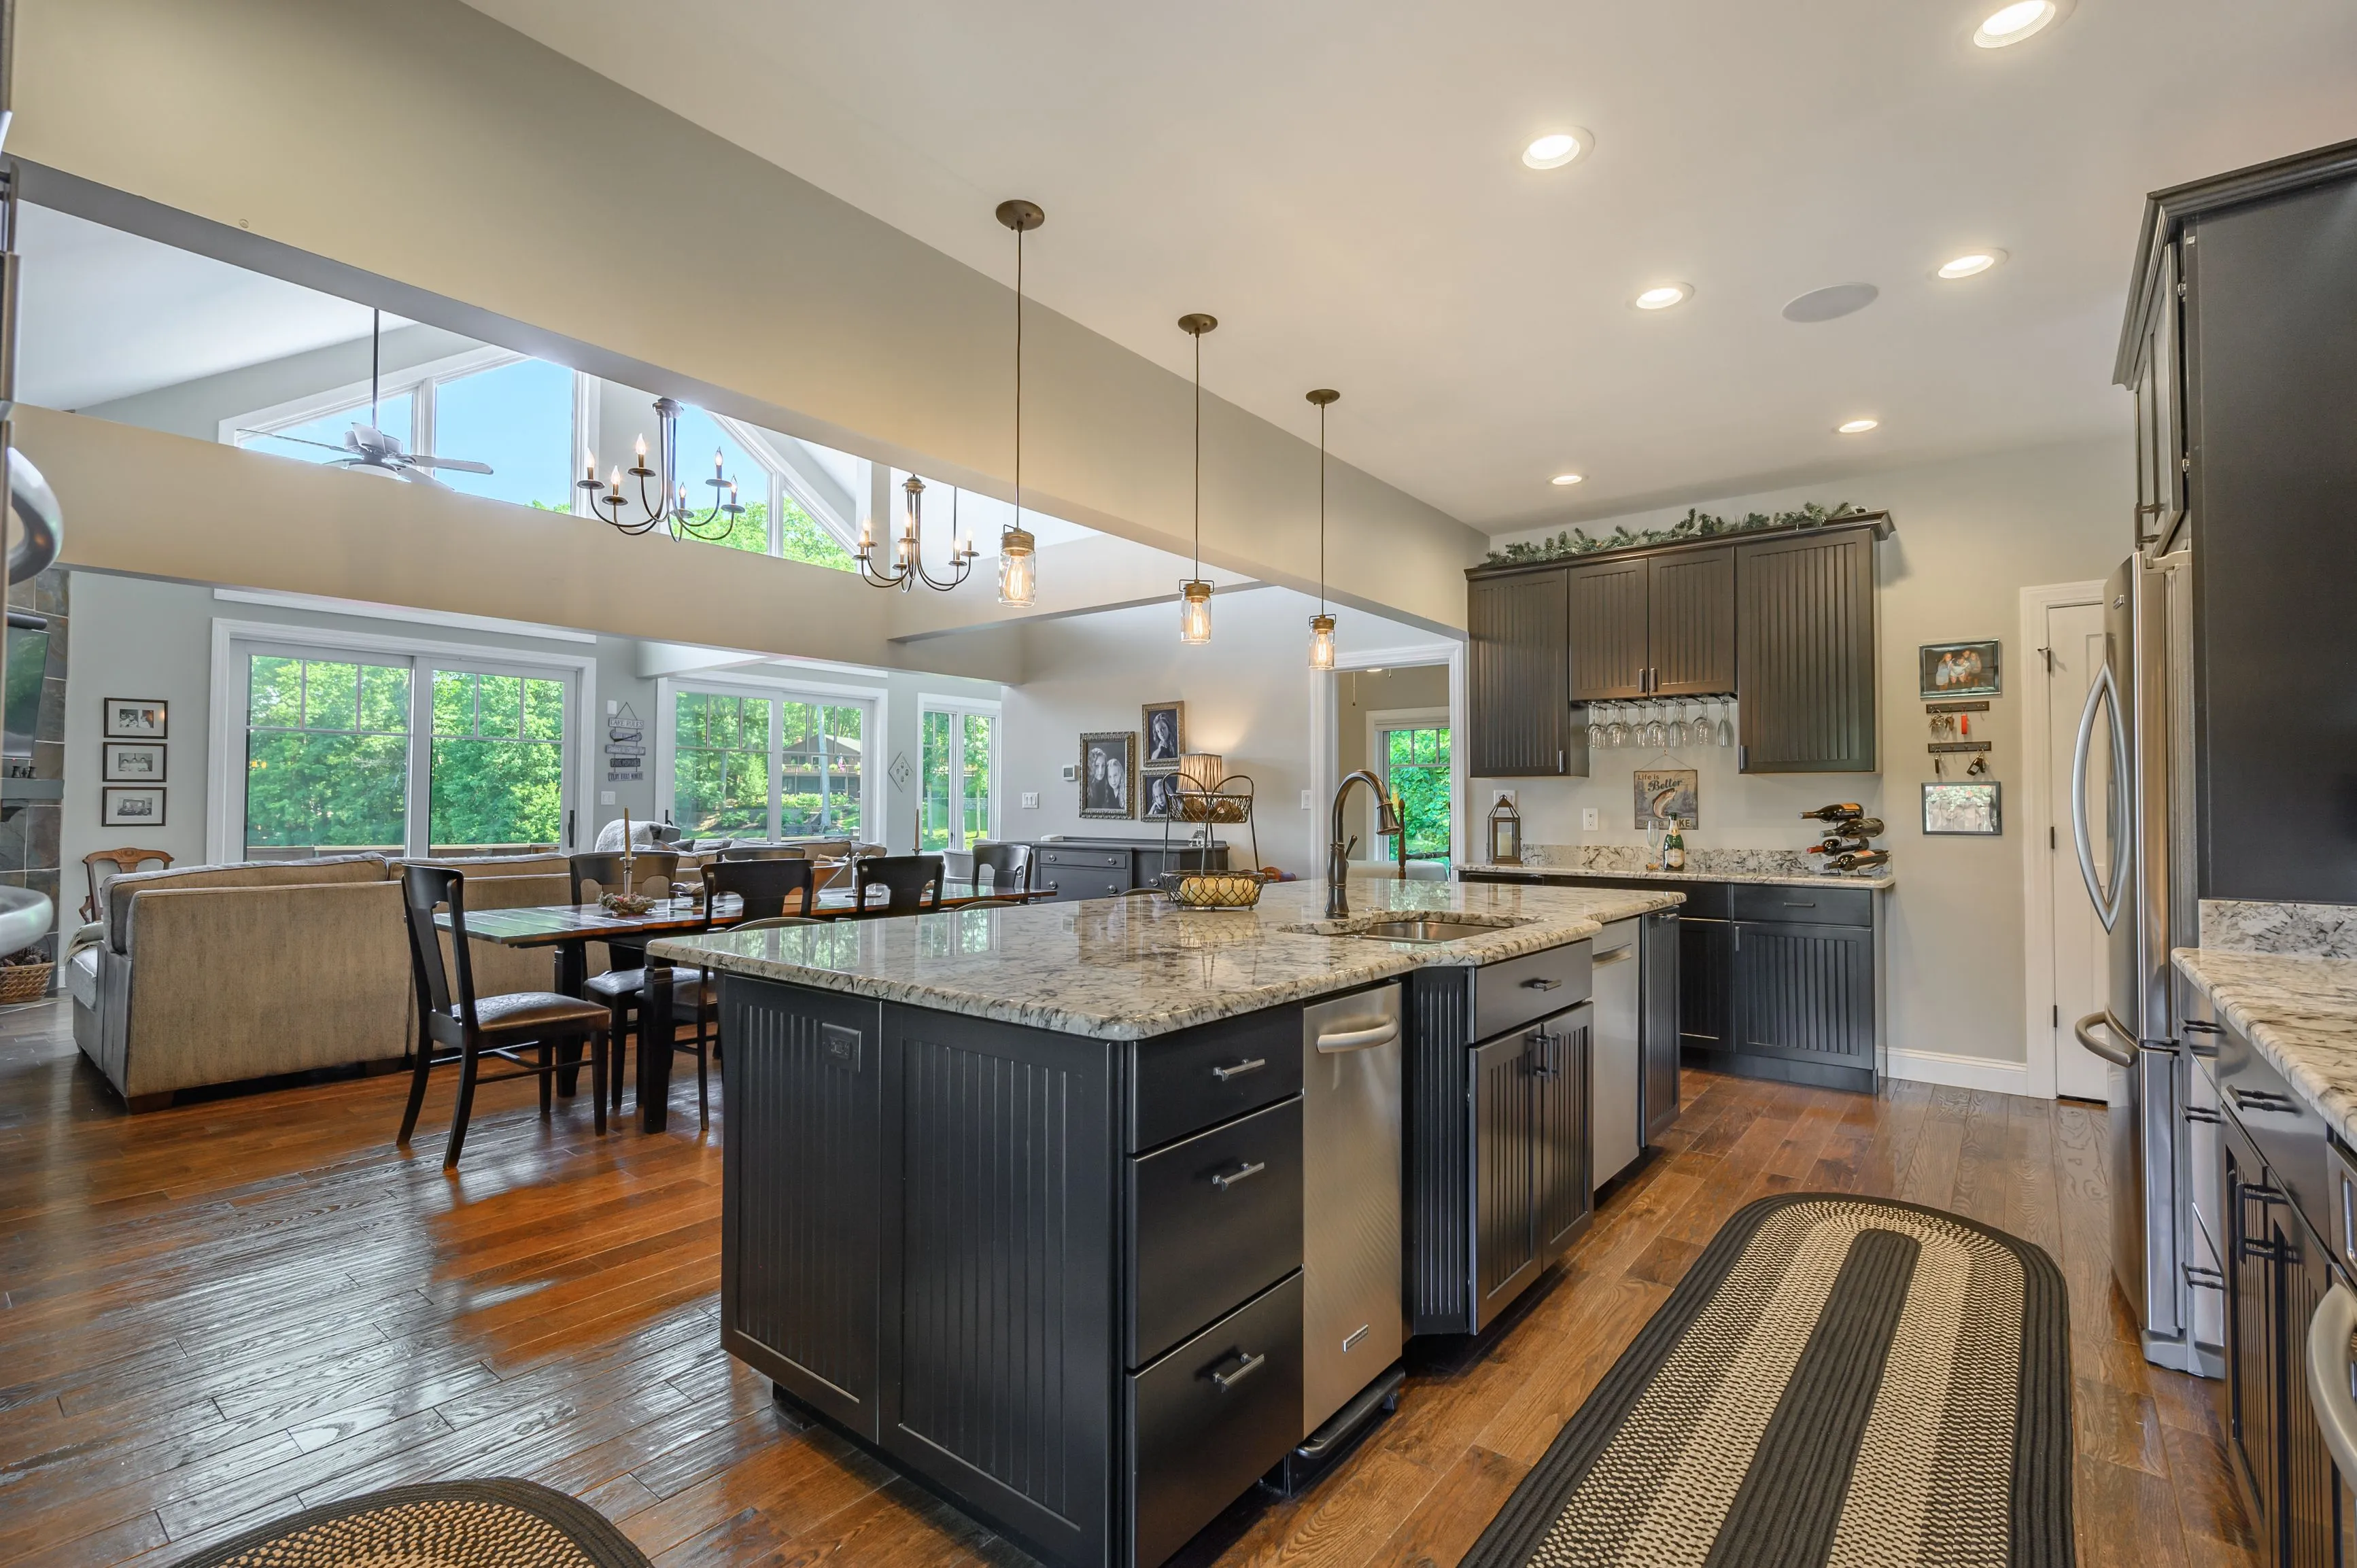 Spacious modern kitchen with center island, hardwood floors, and adjacent dining area.